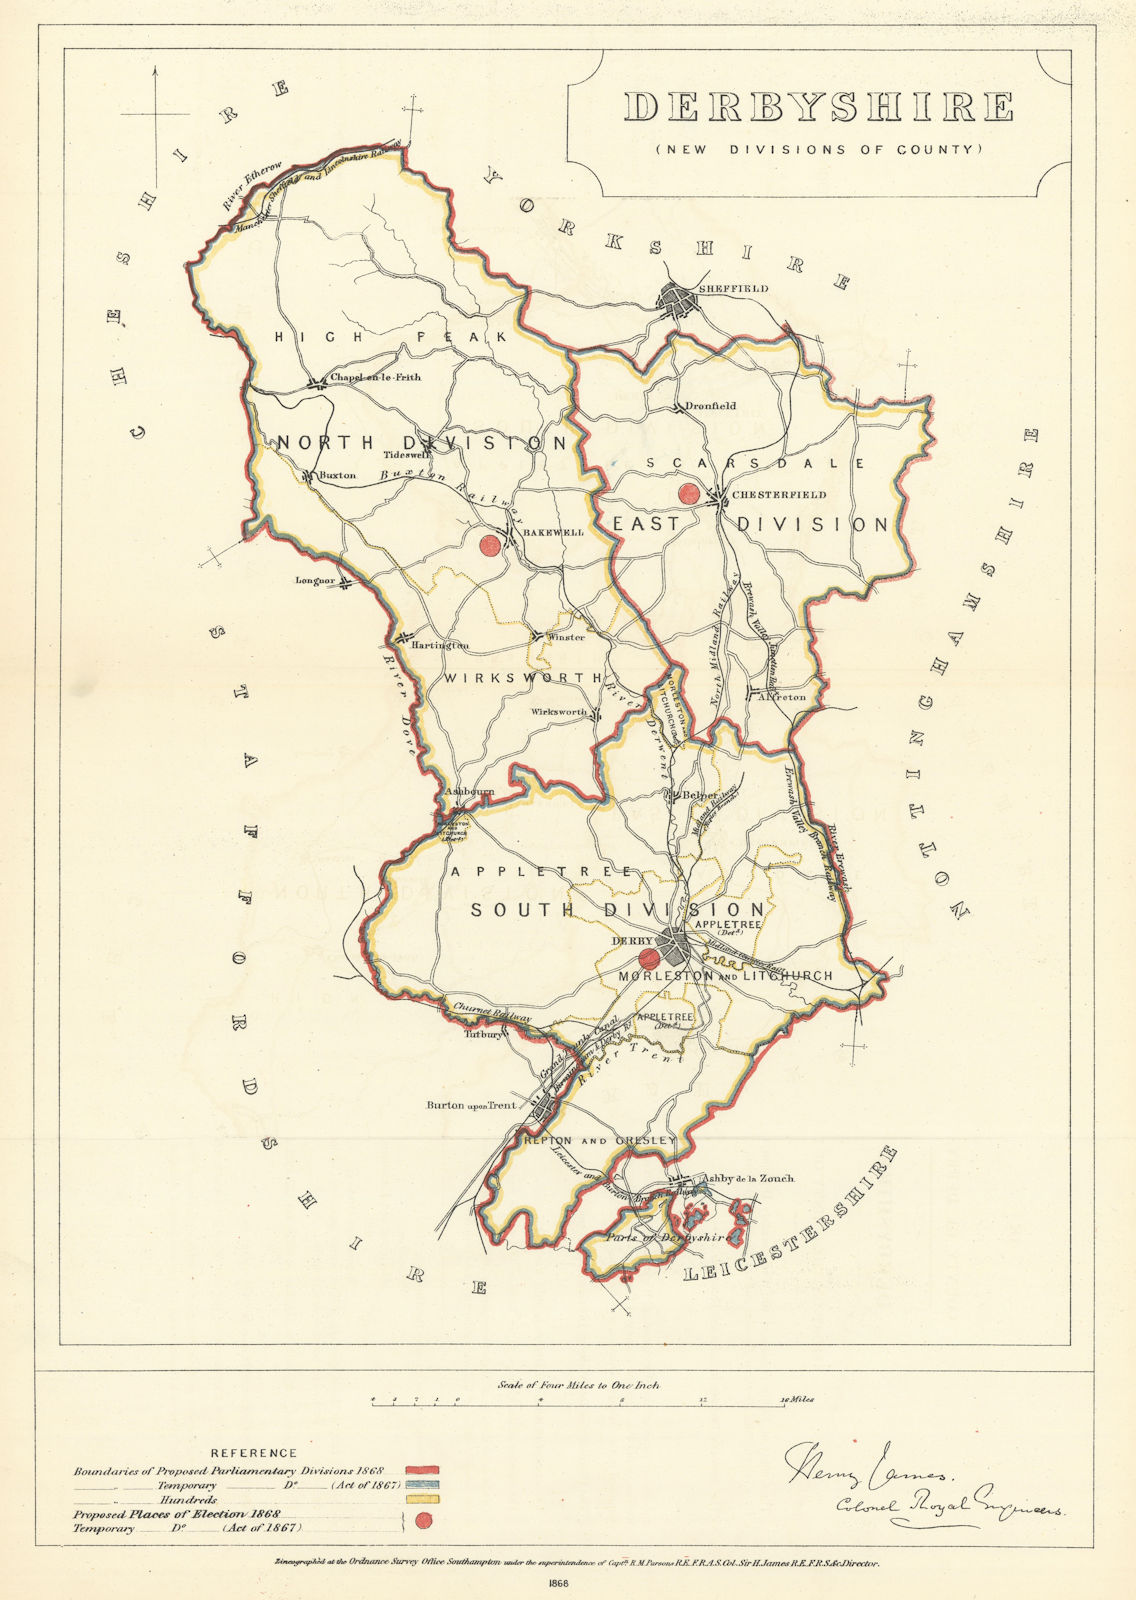 Associate Product Derbyshire (New divisions of County). JAMES. Boundary Commission 1868 old map